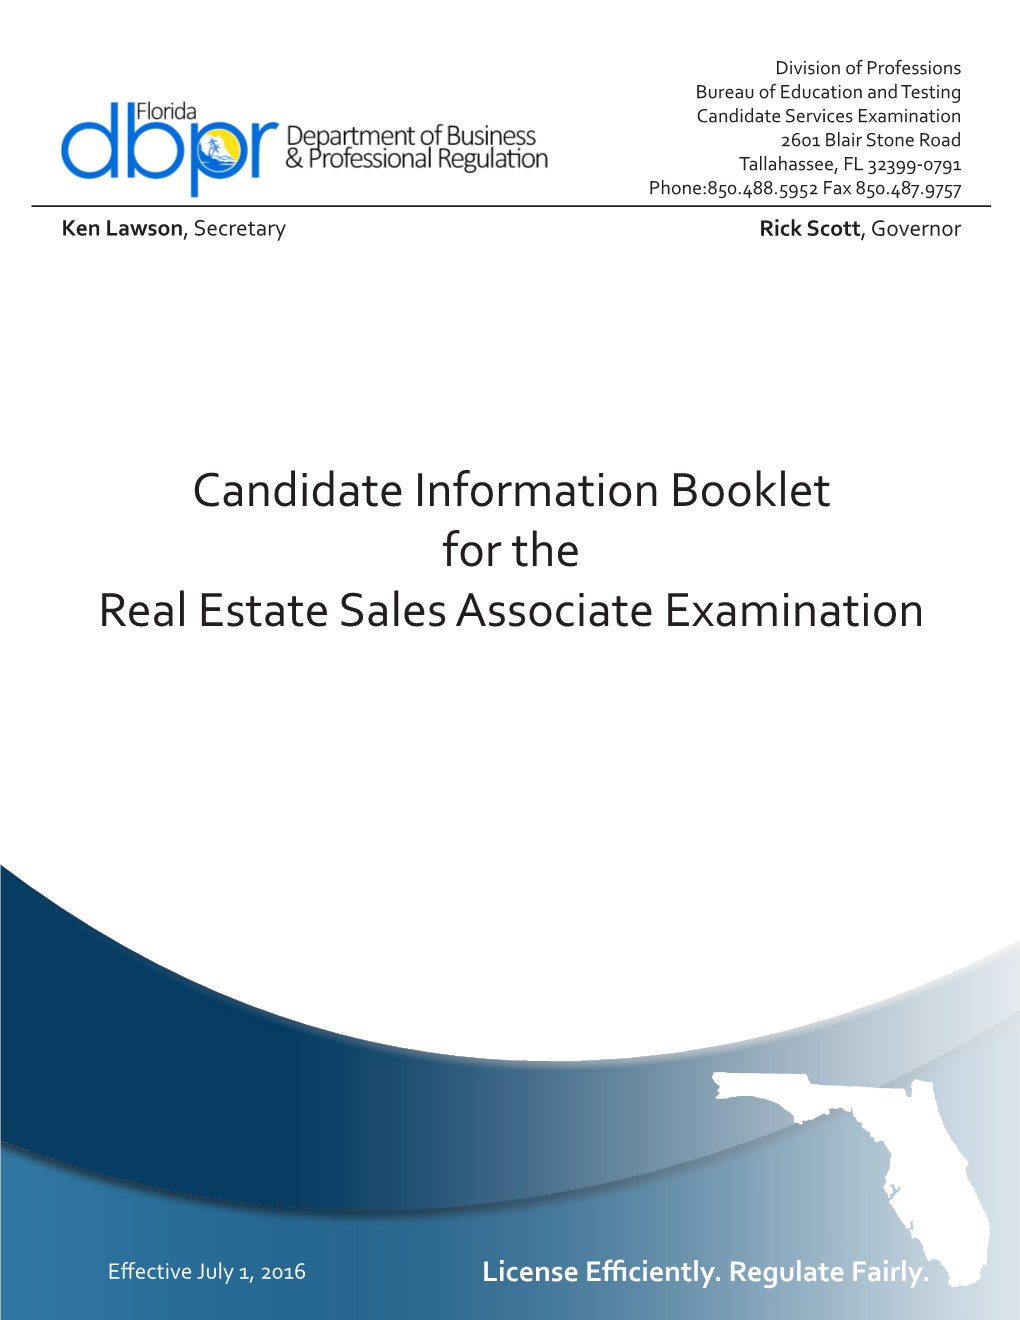 Candidate Information Booklet for the Real Estate Sales Associate Examination